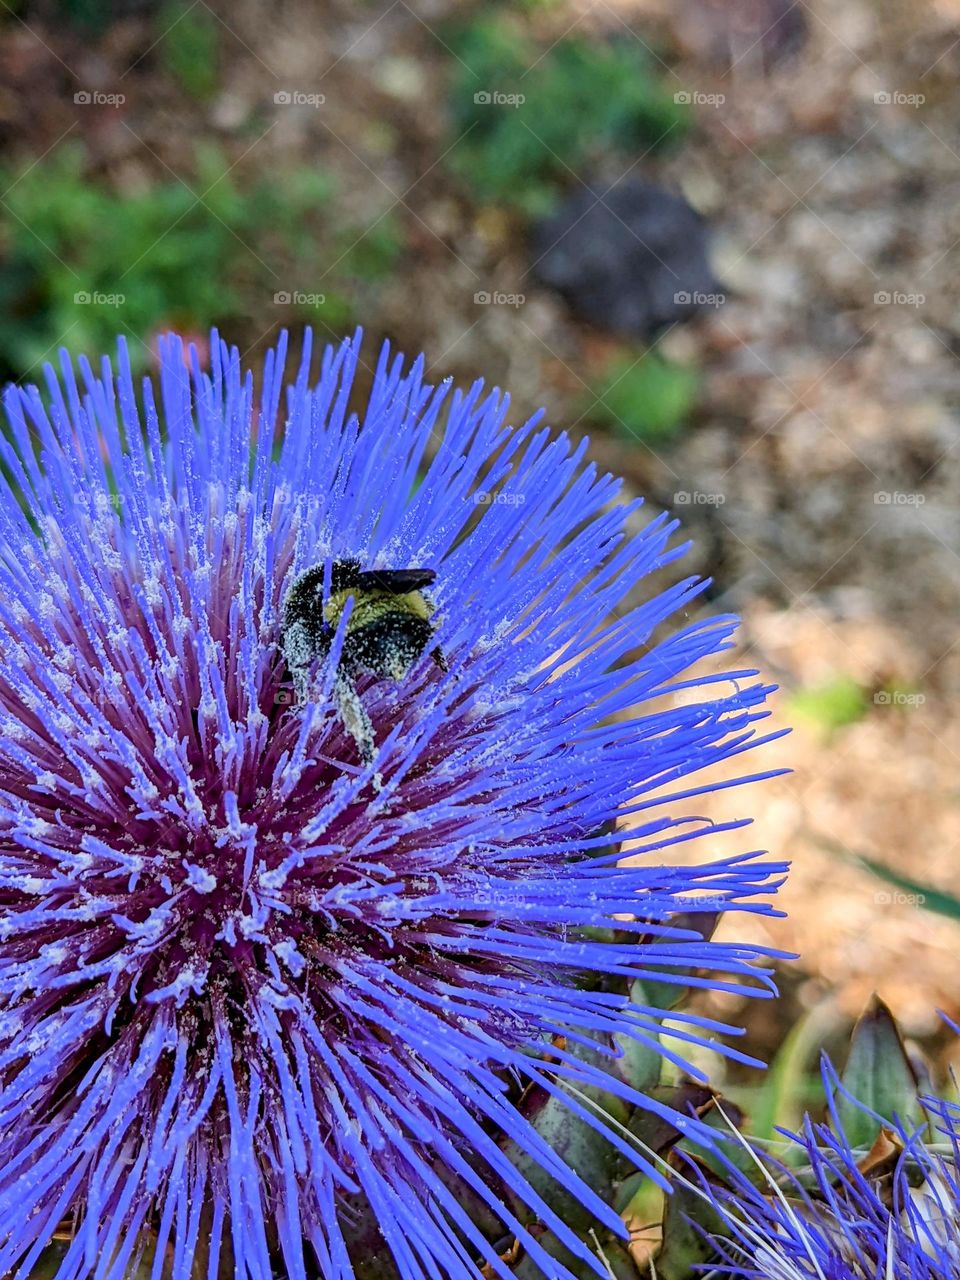 Bumble Bee and it's flower